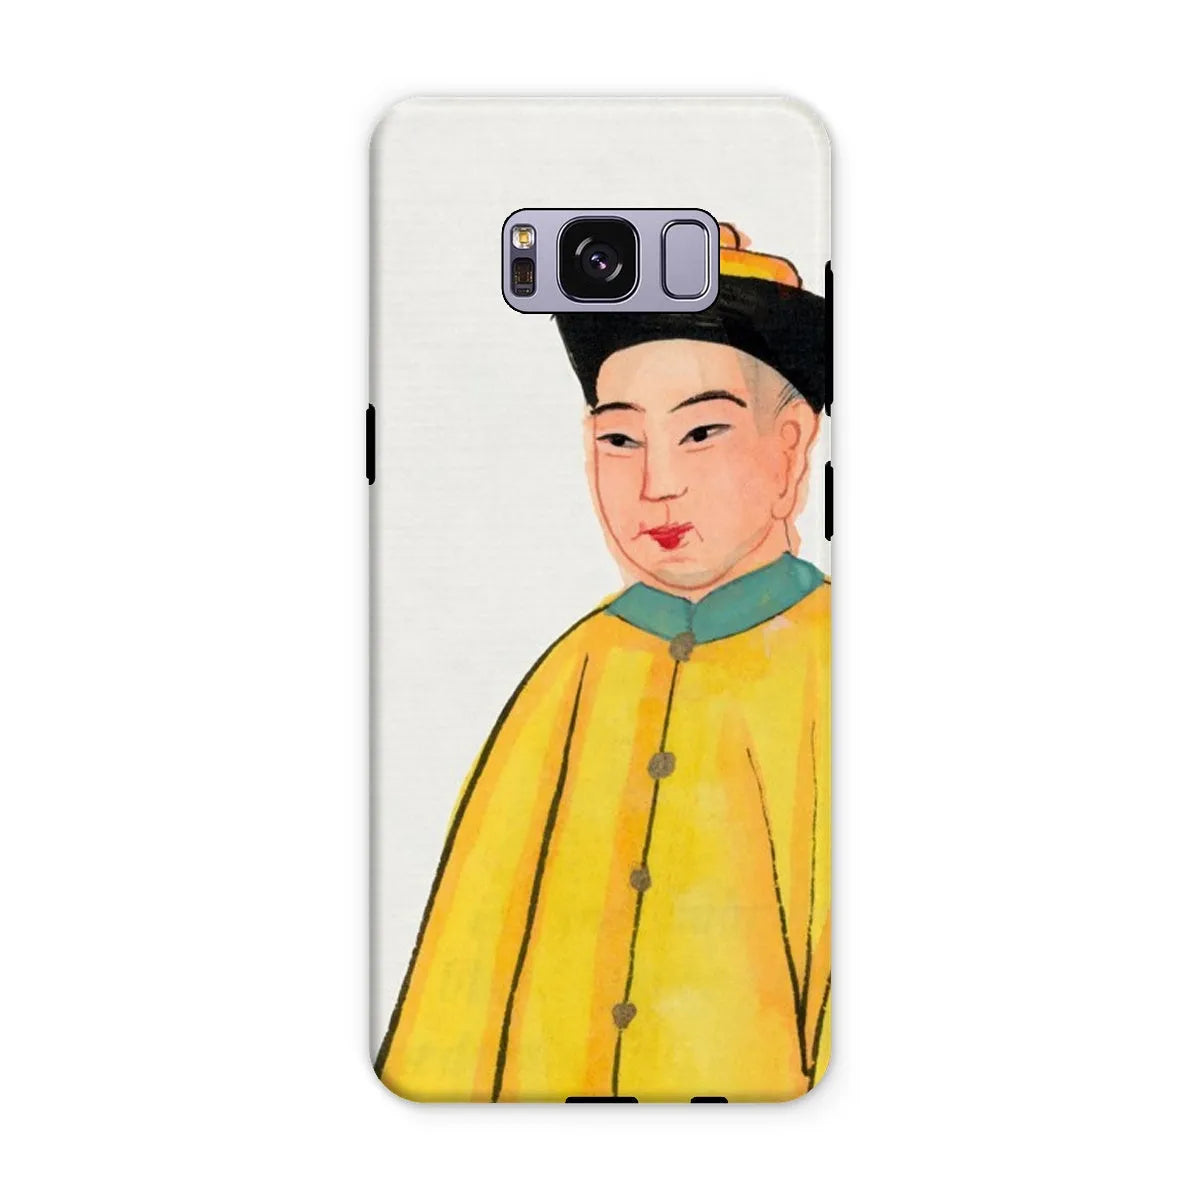 Priest In Yellow Robes - Chinese Aesthetic Art Phone Case - Samsung Galaxy S8 Plus / Matte - Mobile Phone Cases